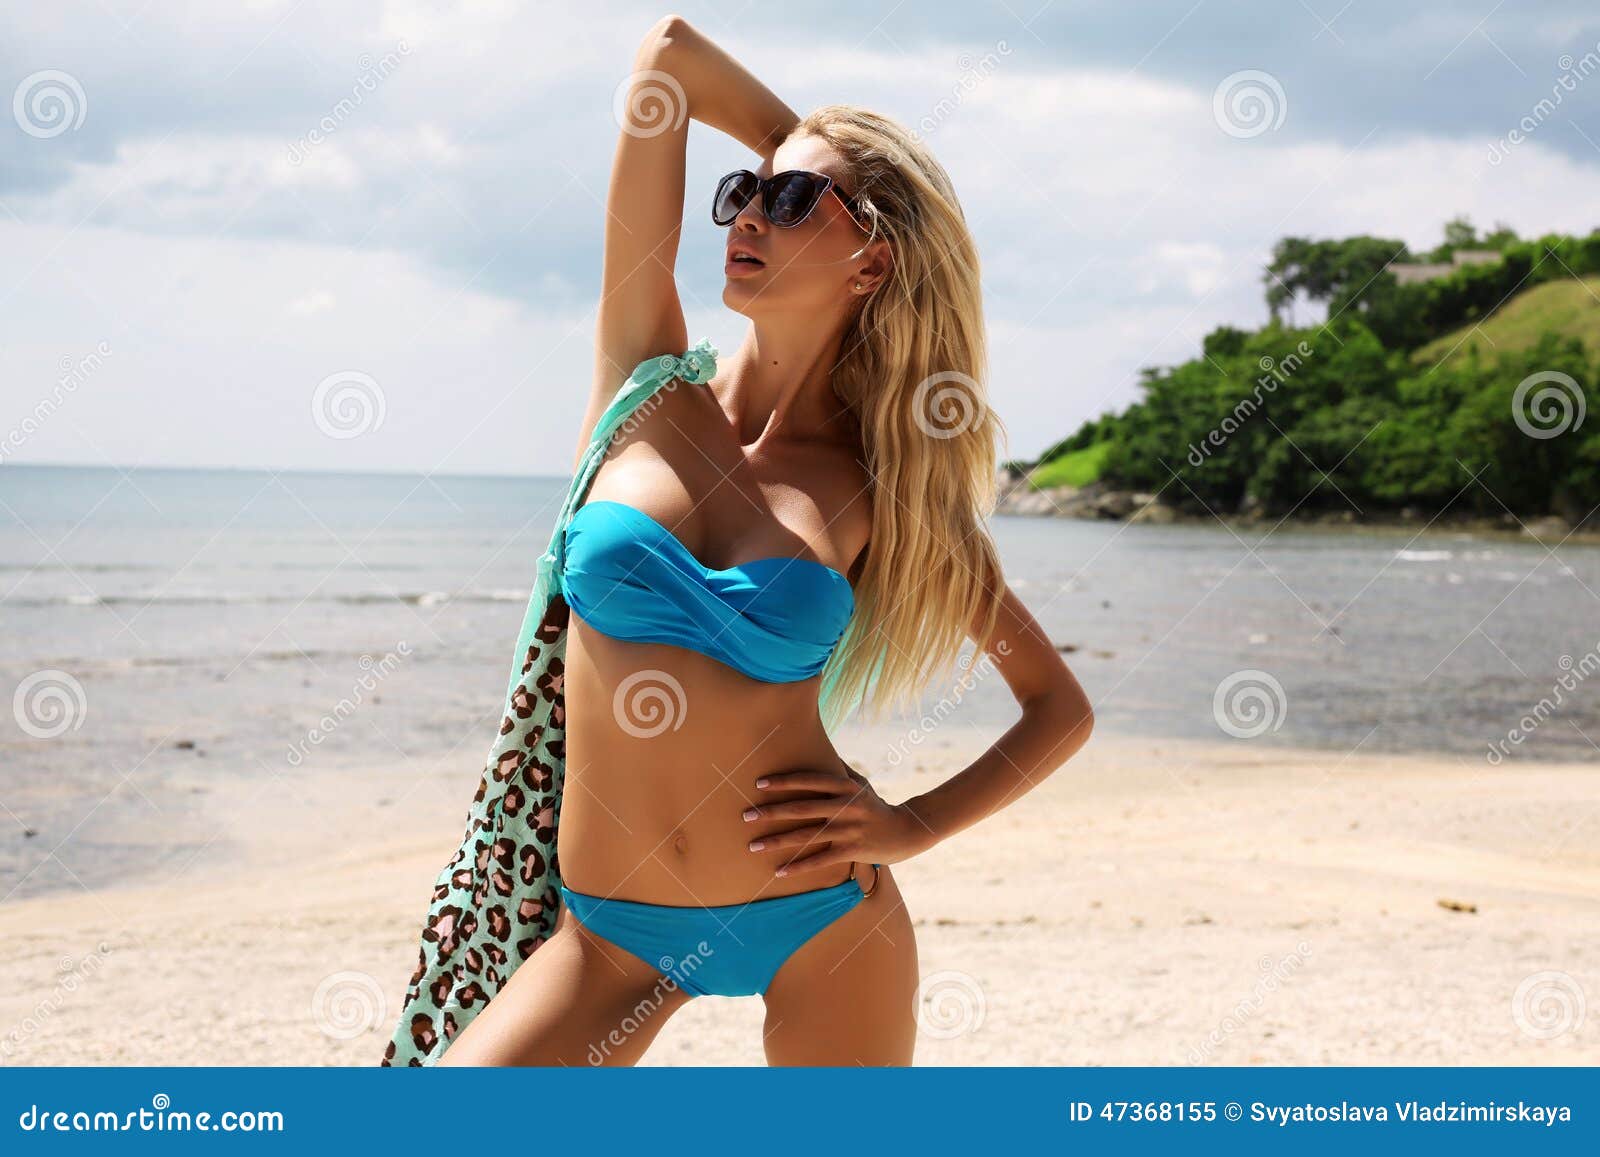 Sexy Woman With Blond Hair In Bikini And Sunglasses